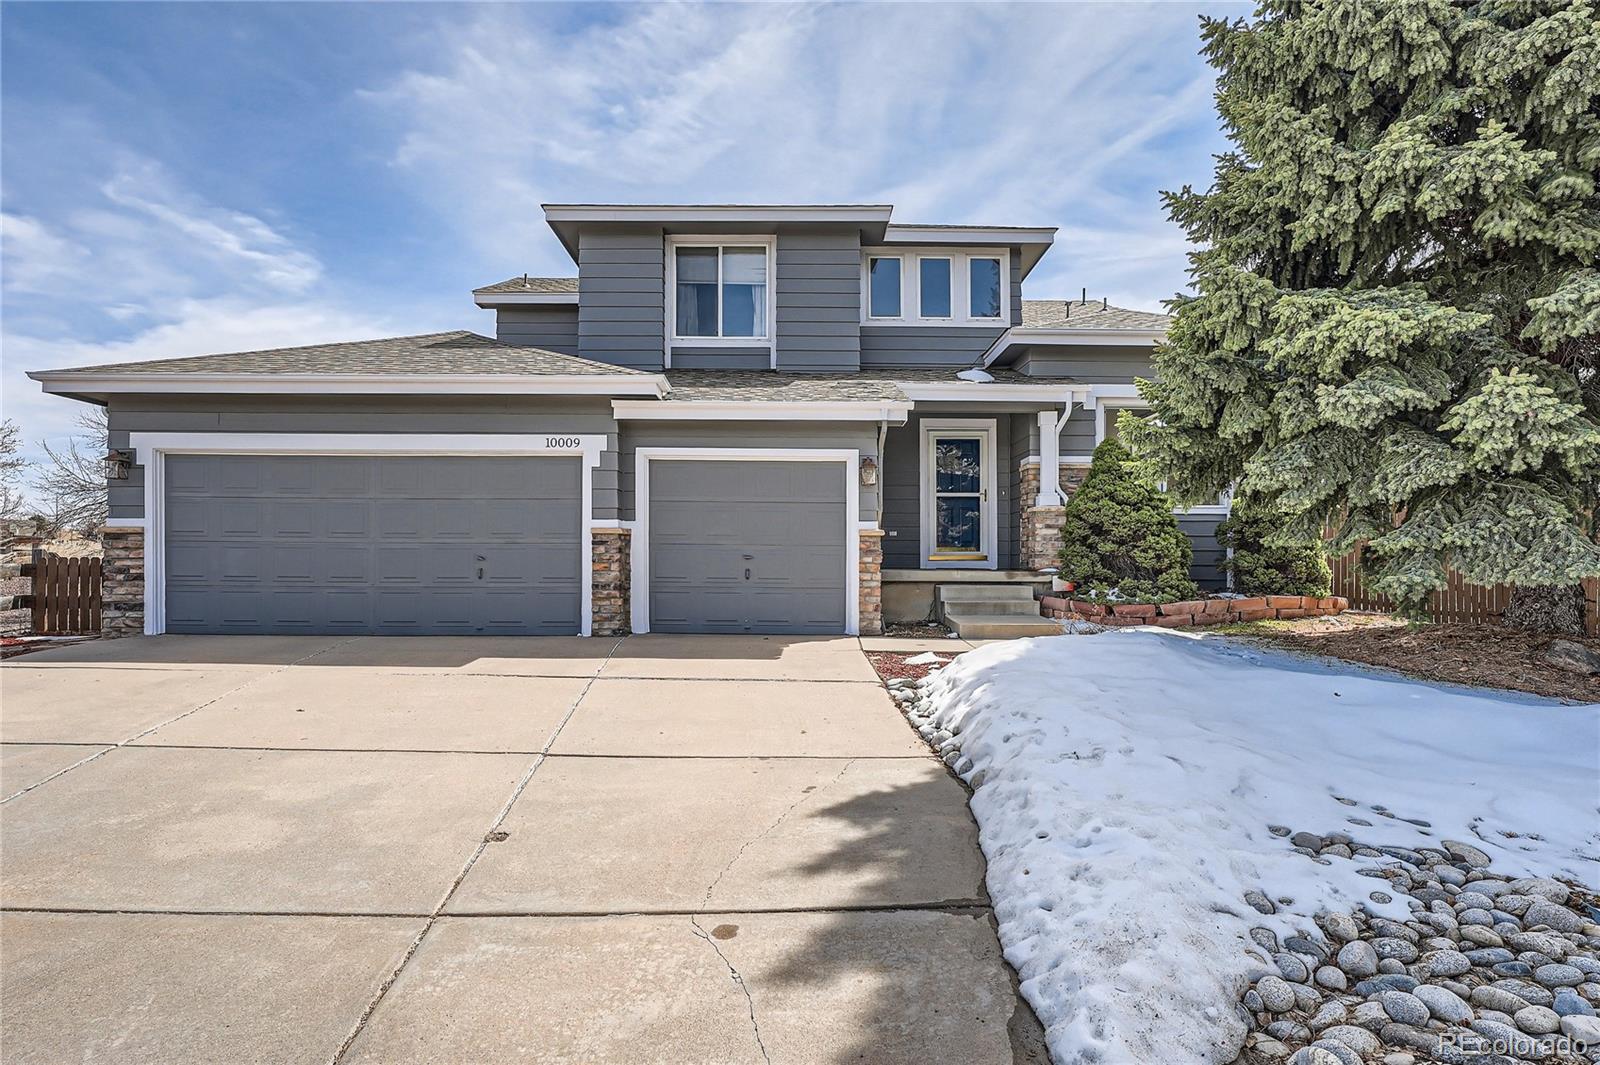 10009  blackbird circle, highlands ranch sold home. Closed on 2024-04-30 for $889,000.